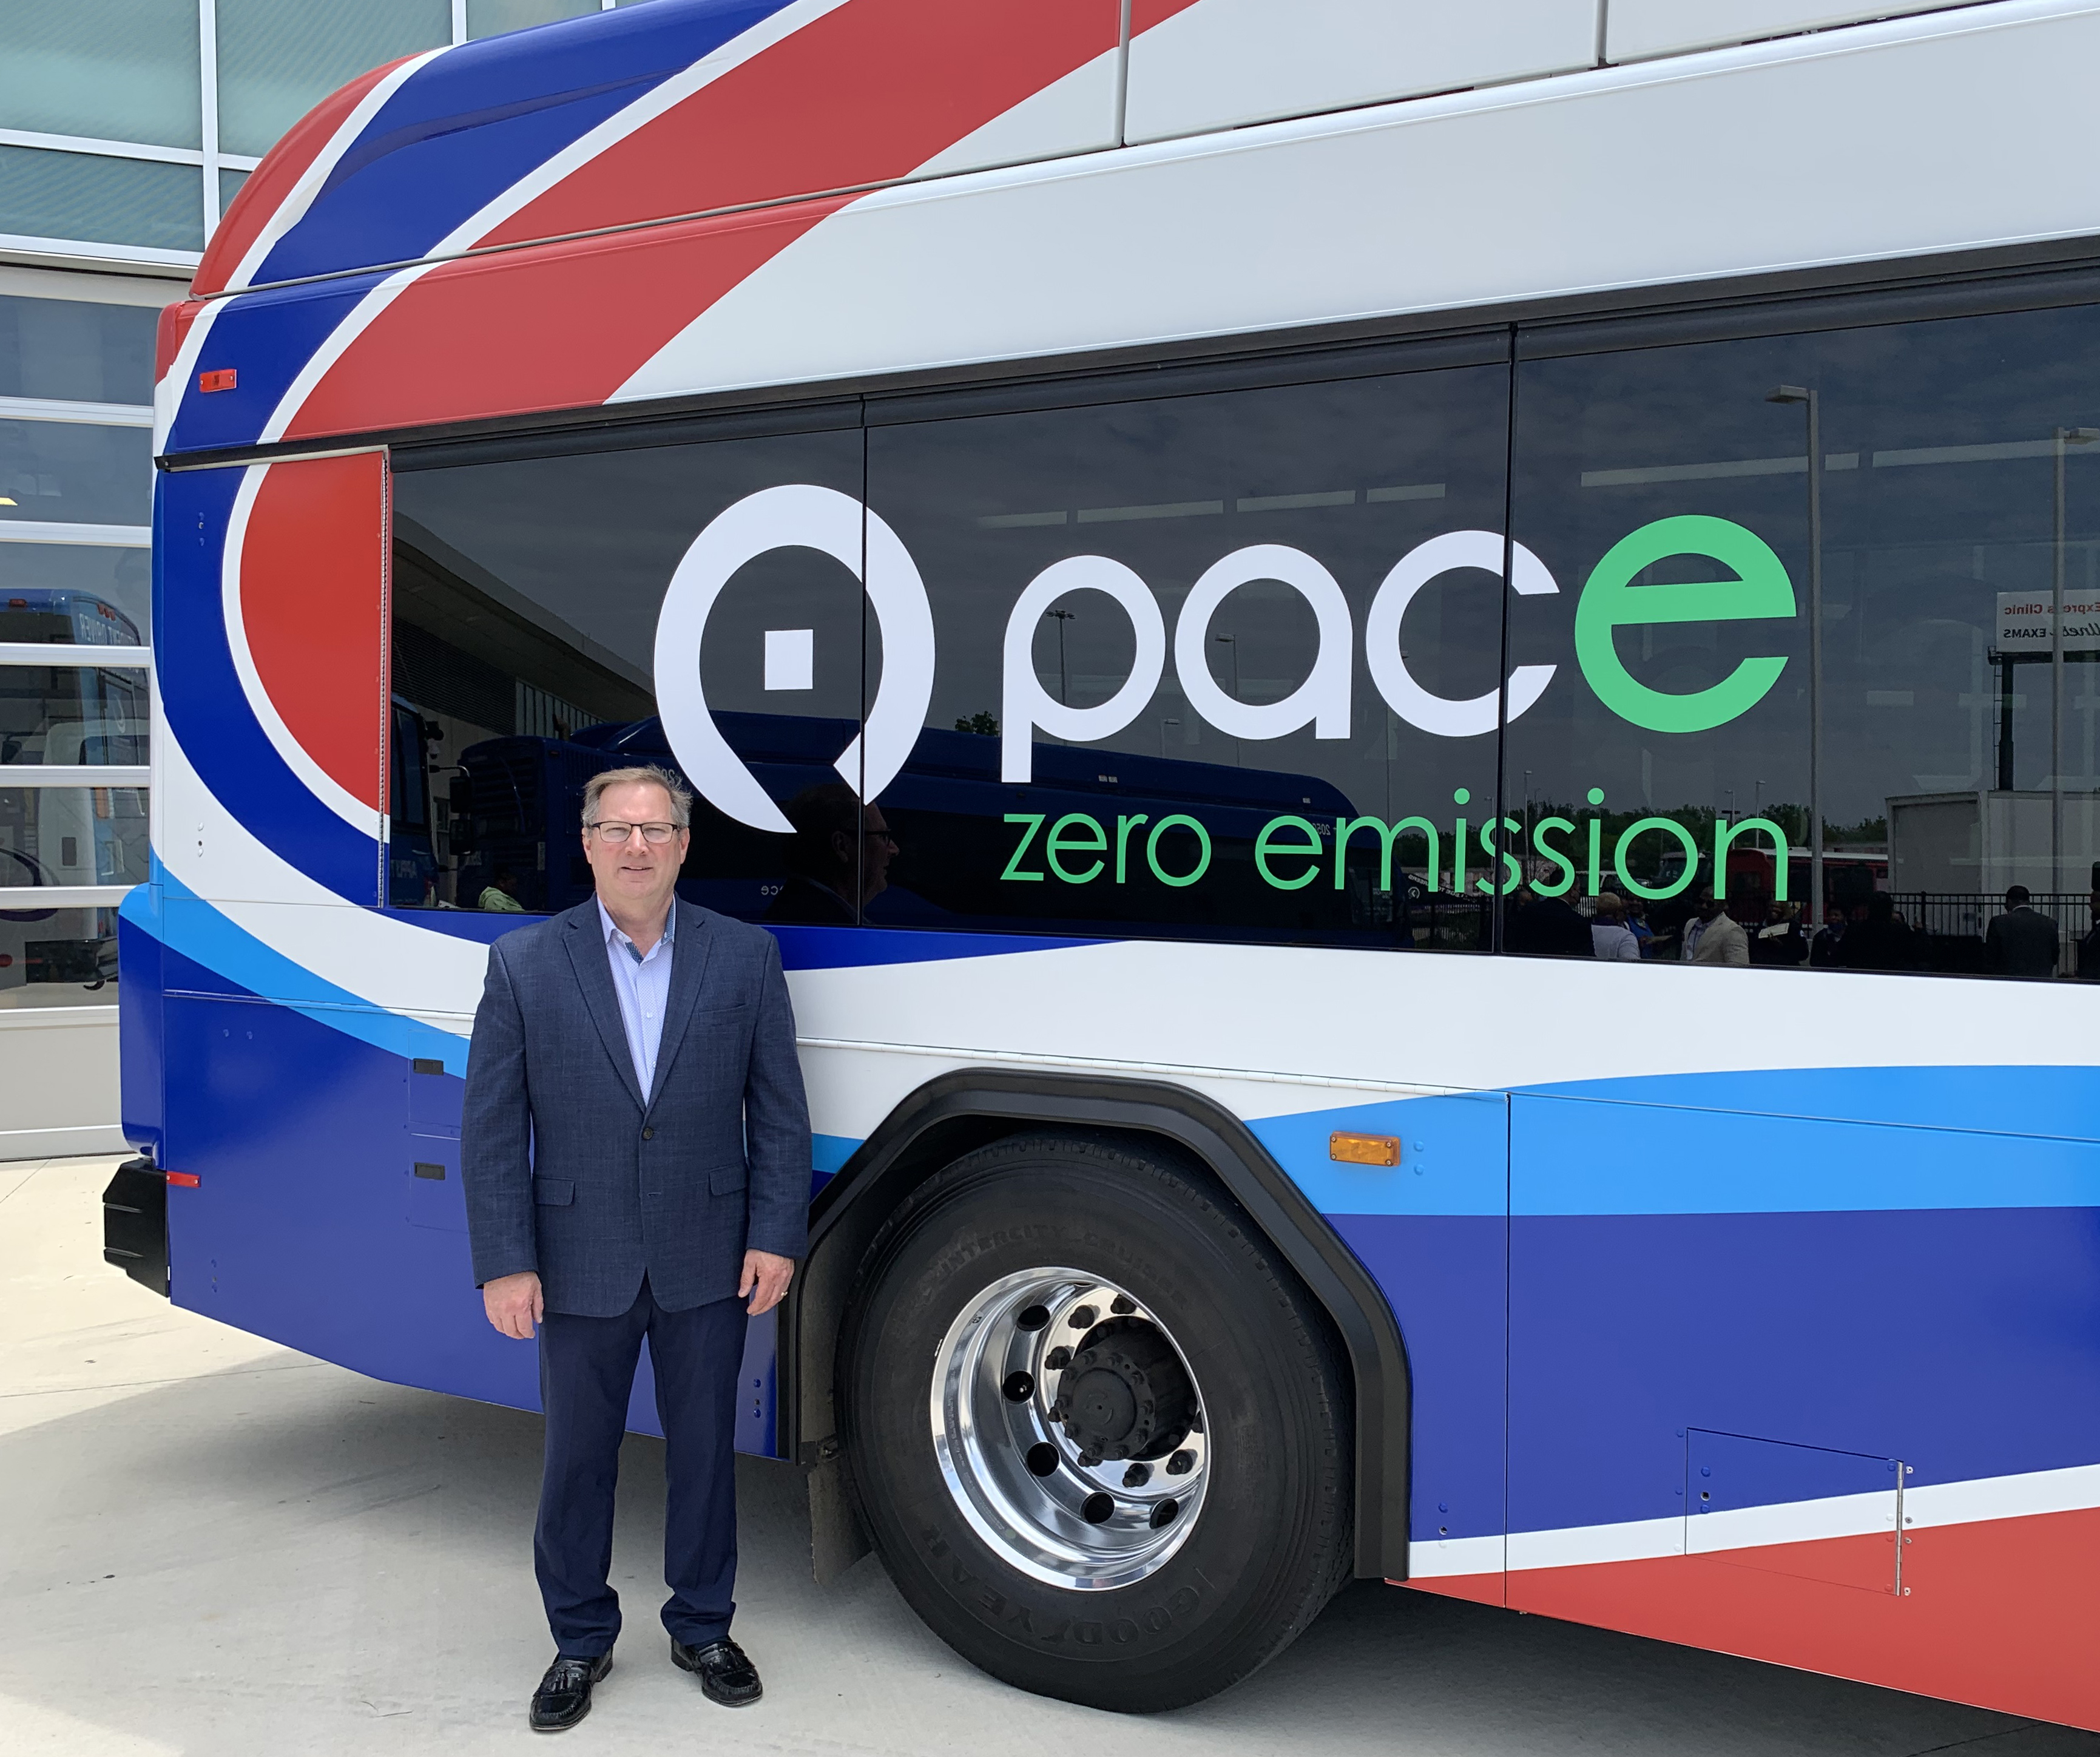 Image of Pace Electric Bus with Chairman Kwasneski